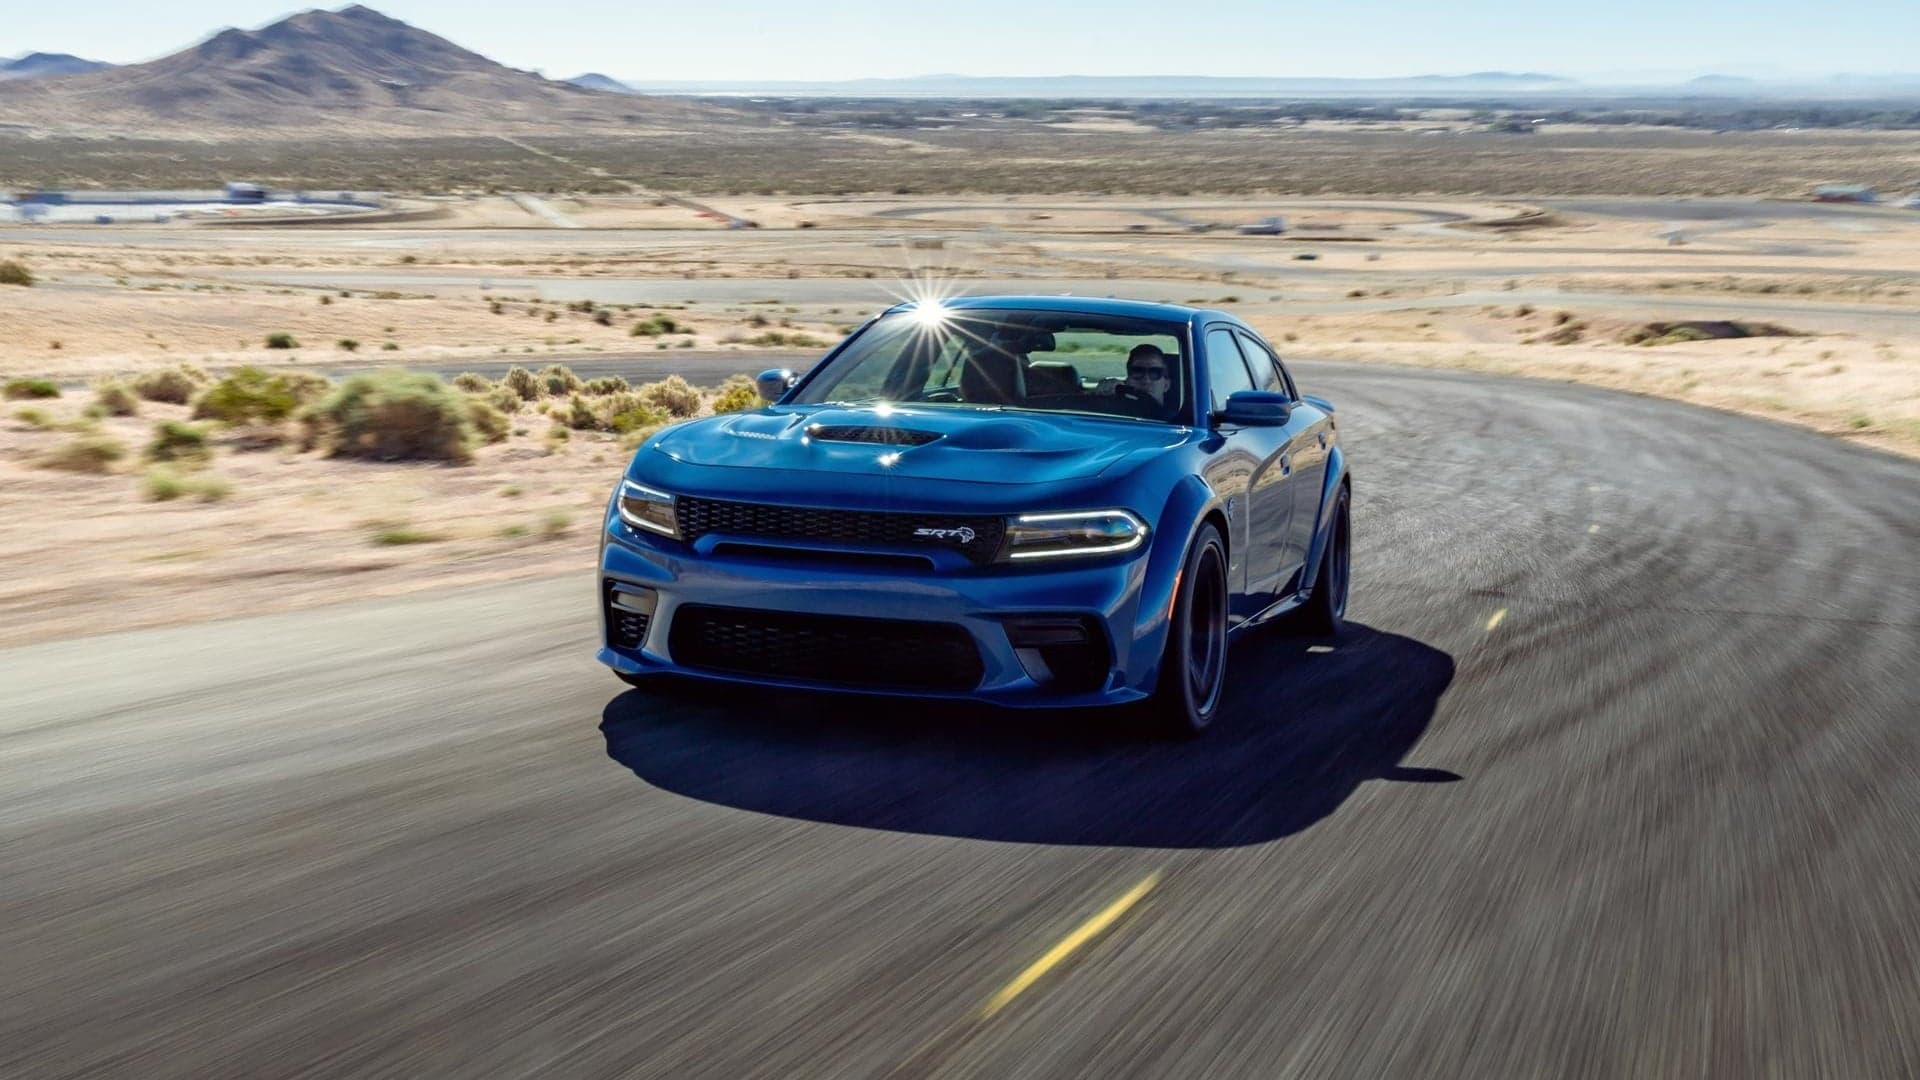 ‘Murica, Yeah! Raise a Beer to the 707-Horsepower 2020 Dodge Charger SRT Hellcat Widebody